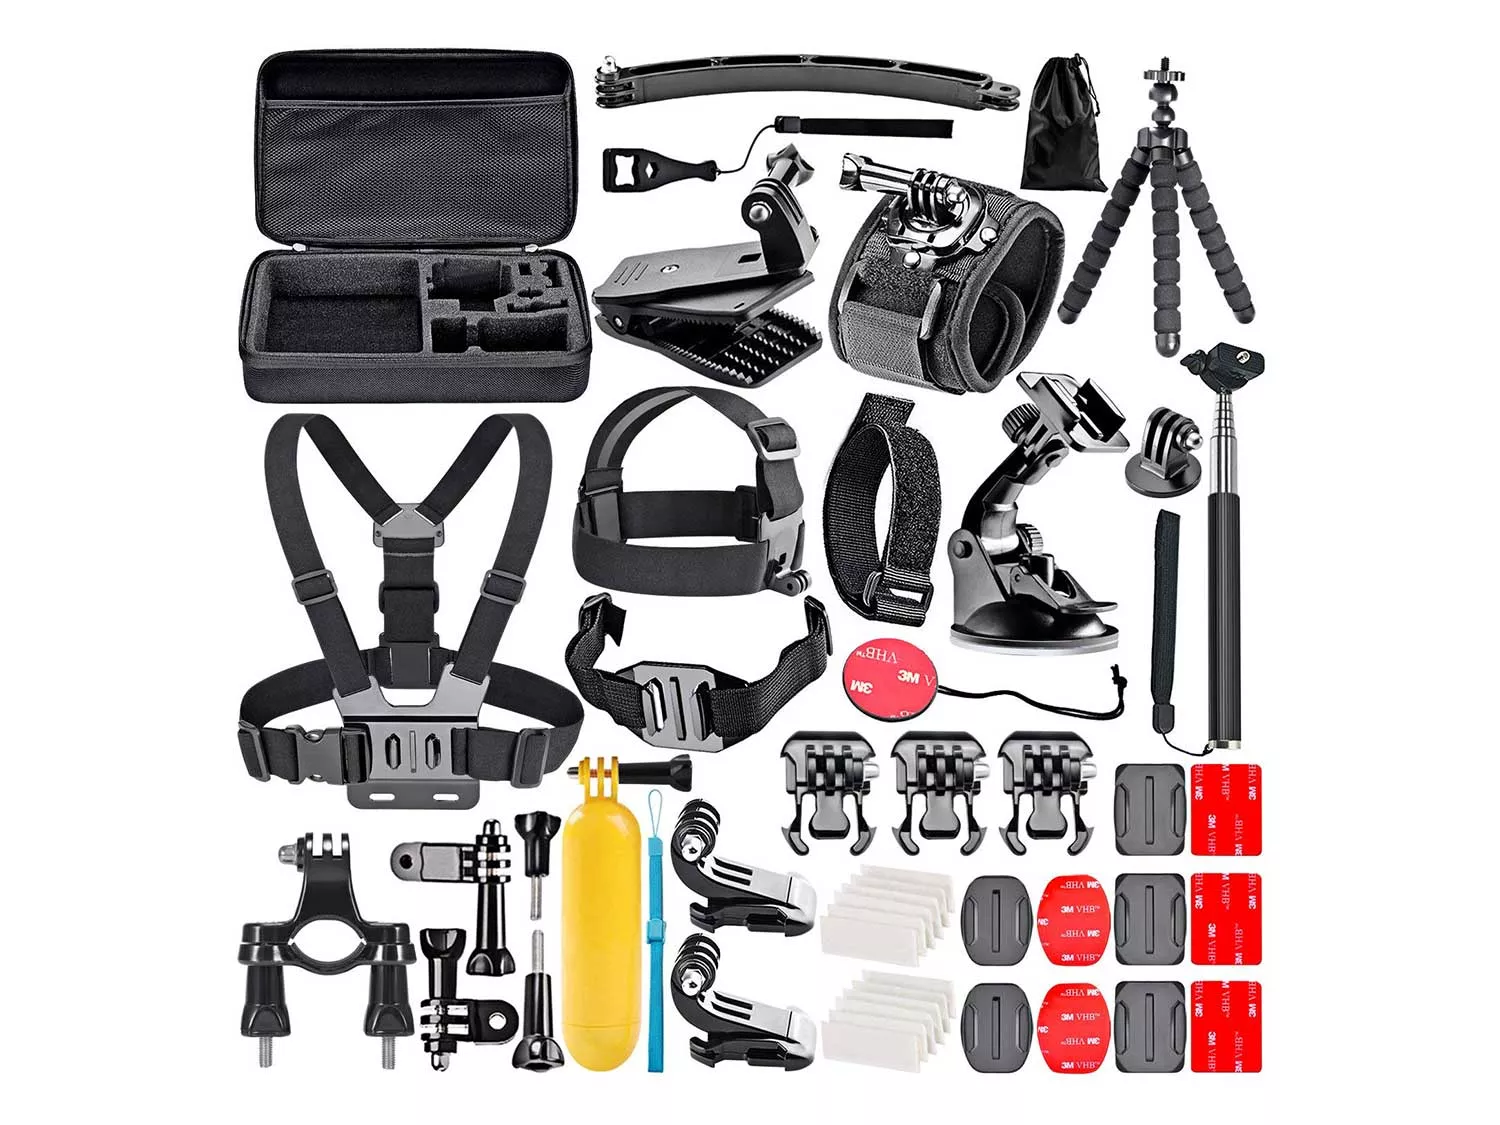 Neewer 50-In-1 Action Camera Kit